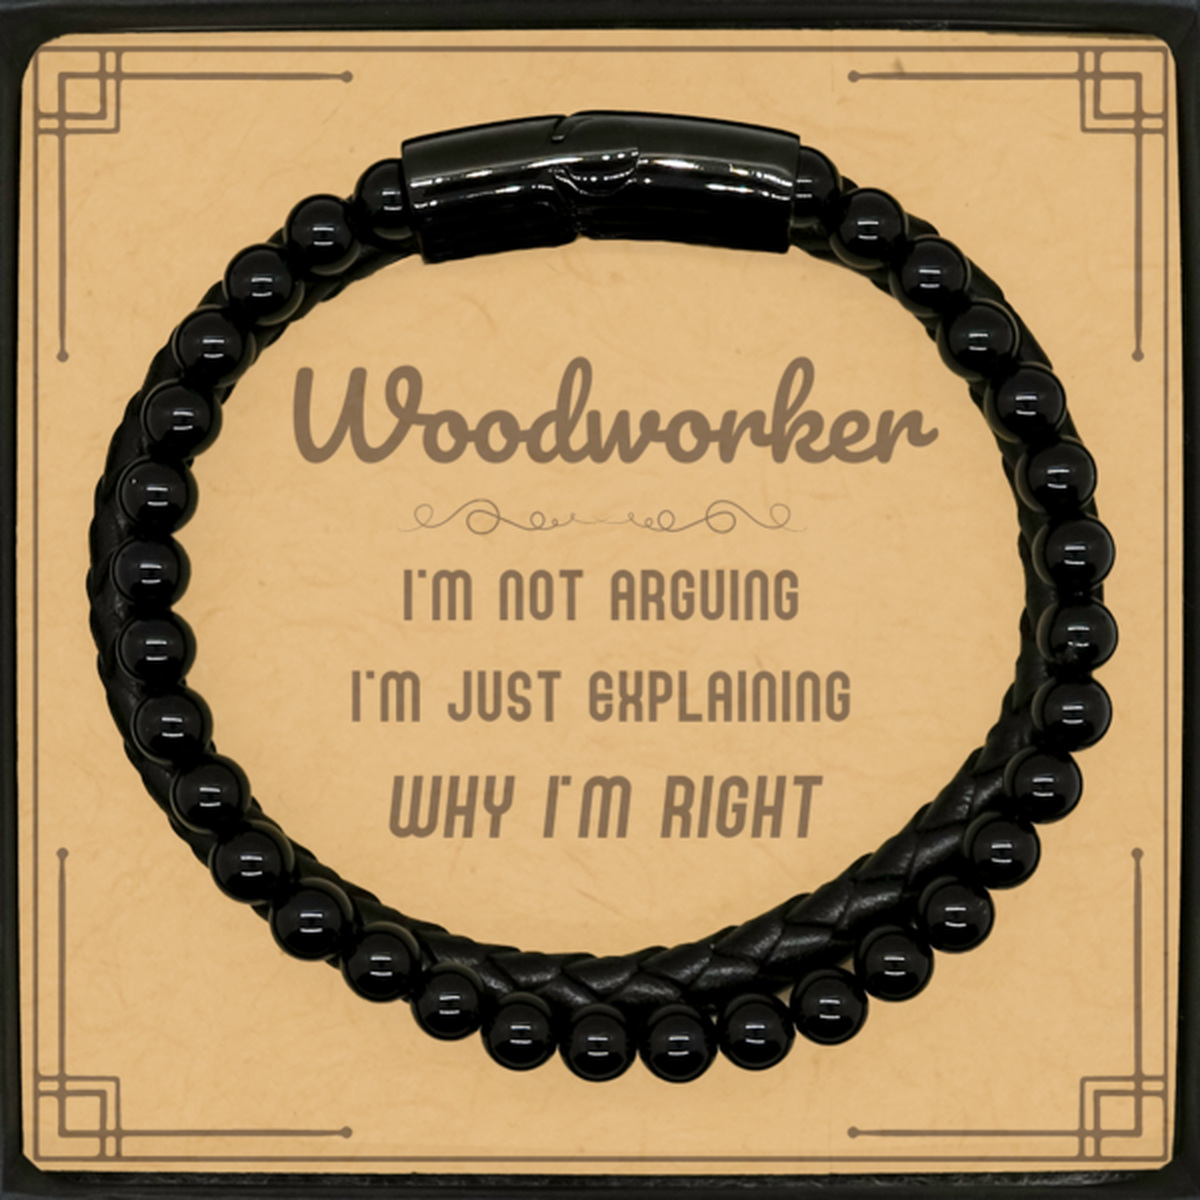 Woodworker I'm not Arguing. I'm Just Explaining Why I'm RIGHT Stone Leather Bracelets, Funny Saying Quote Woodworker Gifts For Woodworker Message Card Graduation Birthday Christmas Gifts for Men Women Coworker